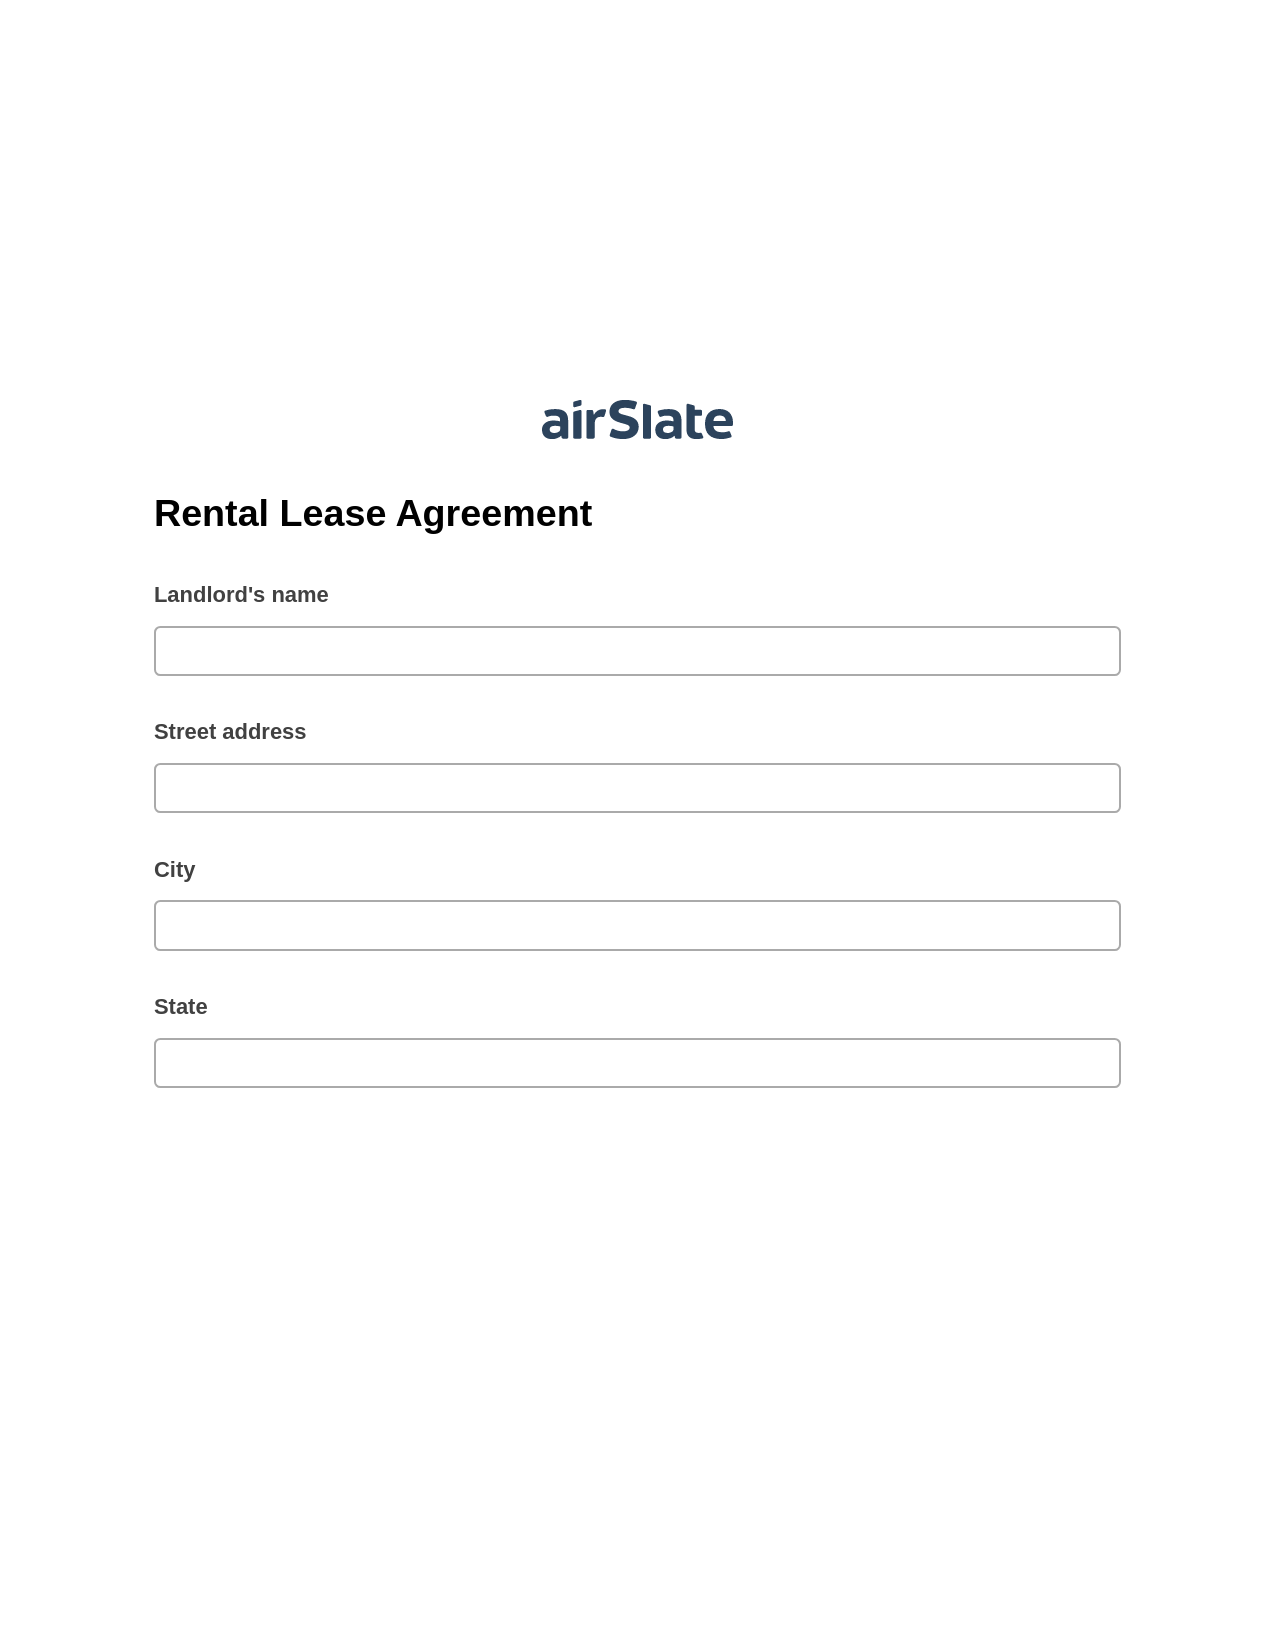 Multirole Rental Lease Agreement Pre-fill from another Slate Bot, Jira Bot, Export to NetSuite Record Bot